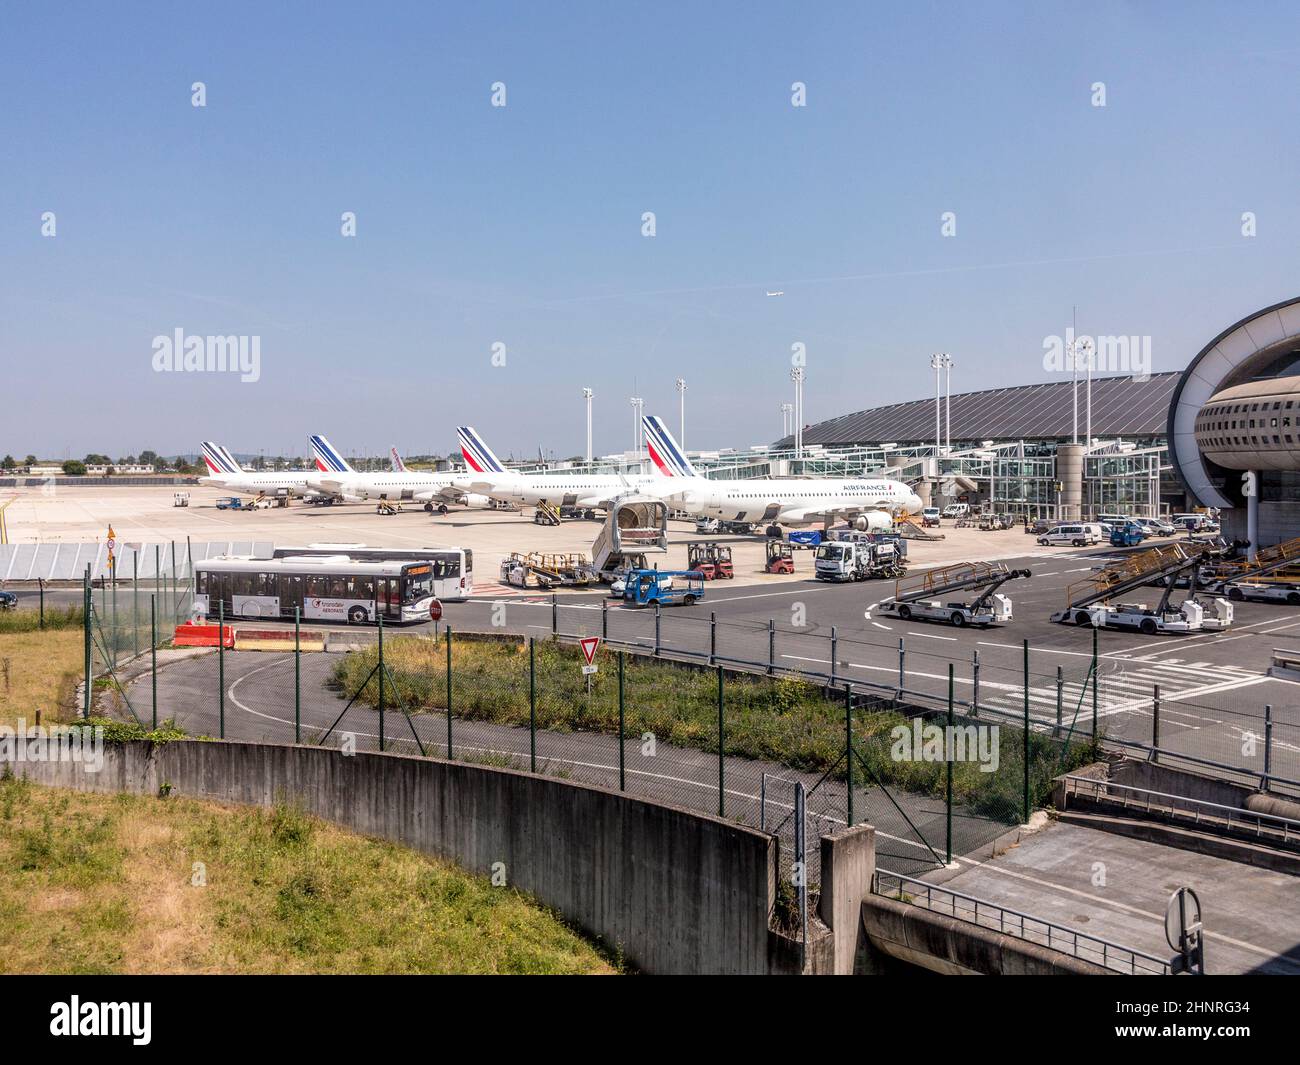 airfrance aircraft parks at the new Terminal of Charles de Gaulle airport in Paris, France Stock Photo